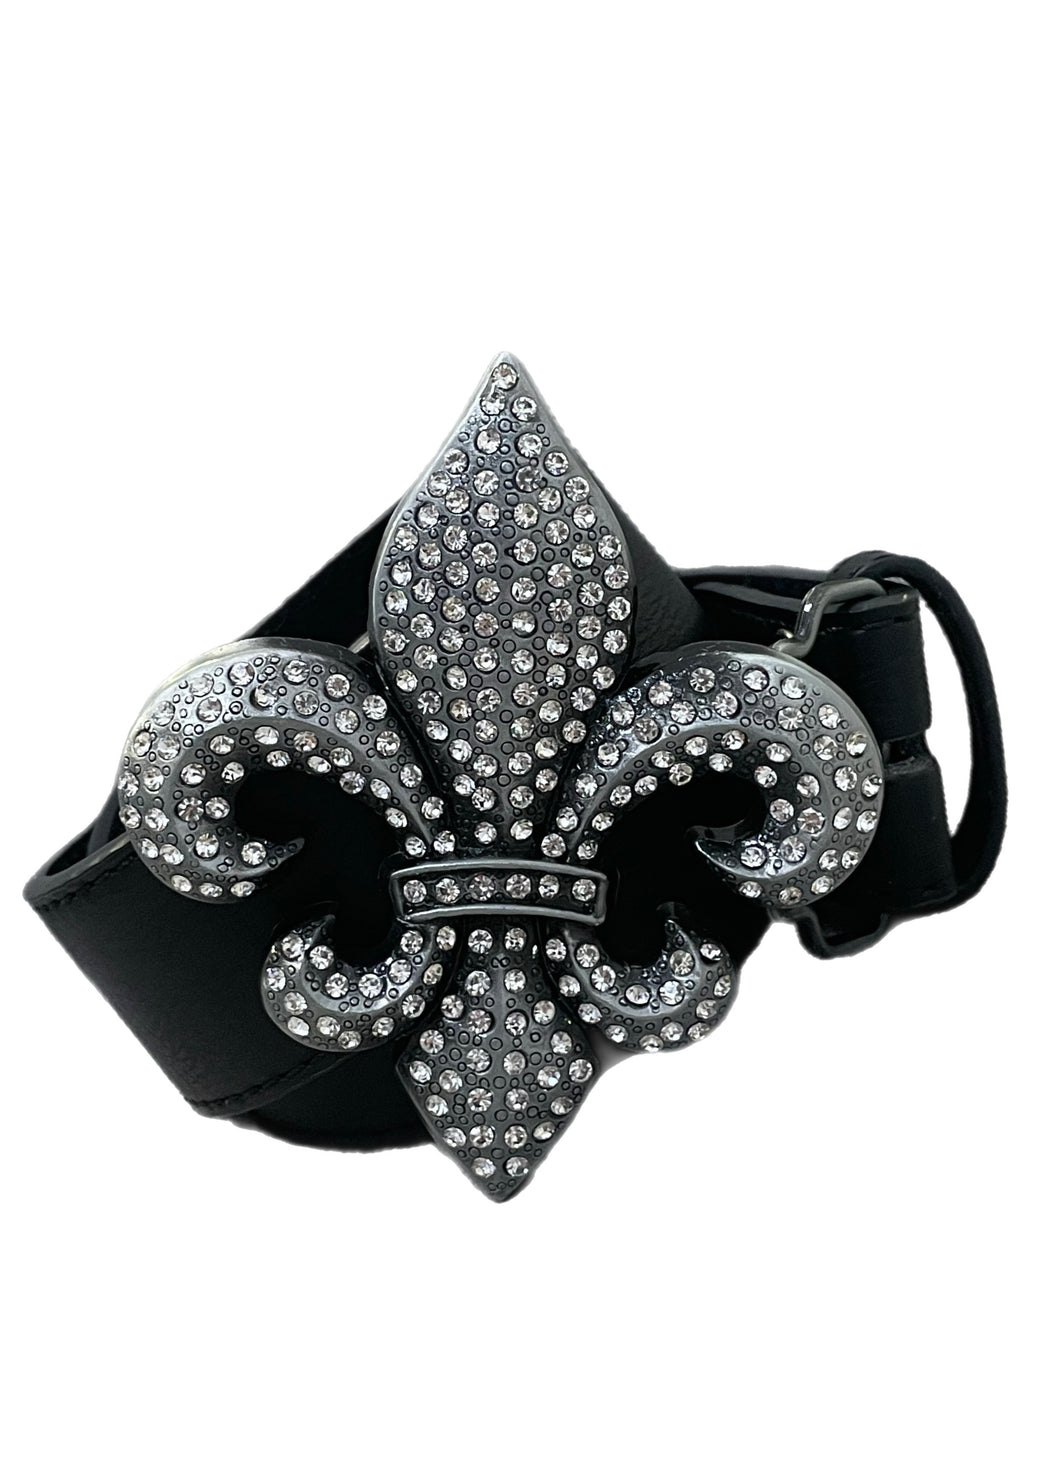 New Orleans Saints, NFL Vintage Limited Edition Belt Buckle with All Over Crystals with New Soft Leather Strap